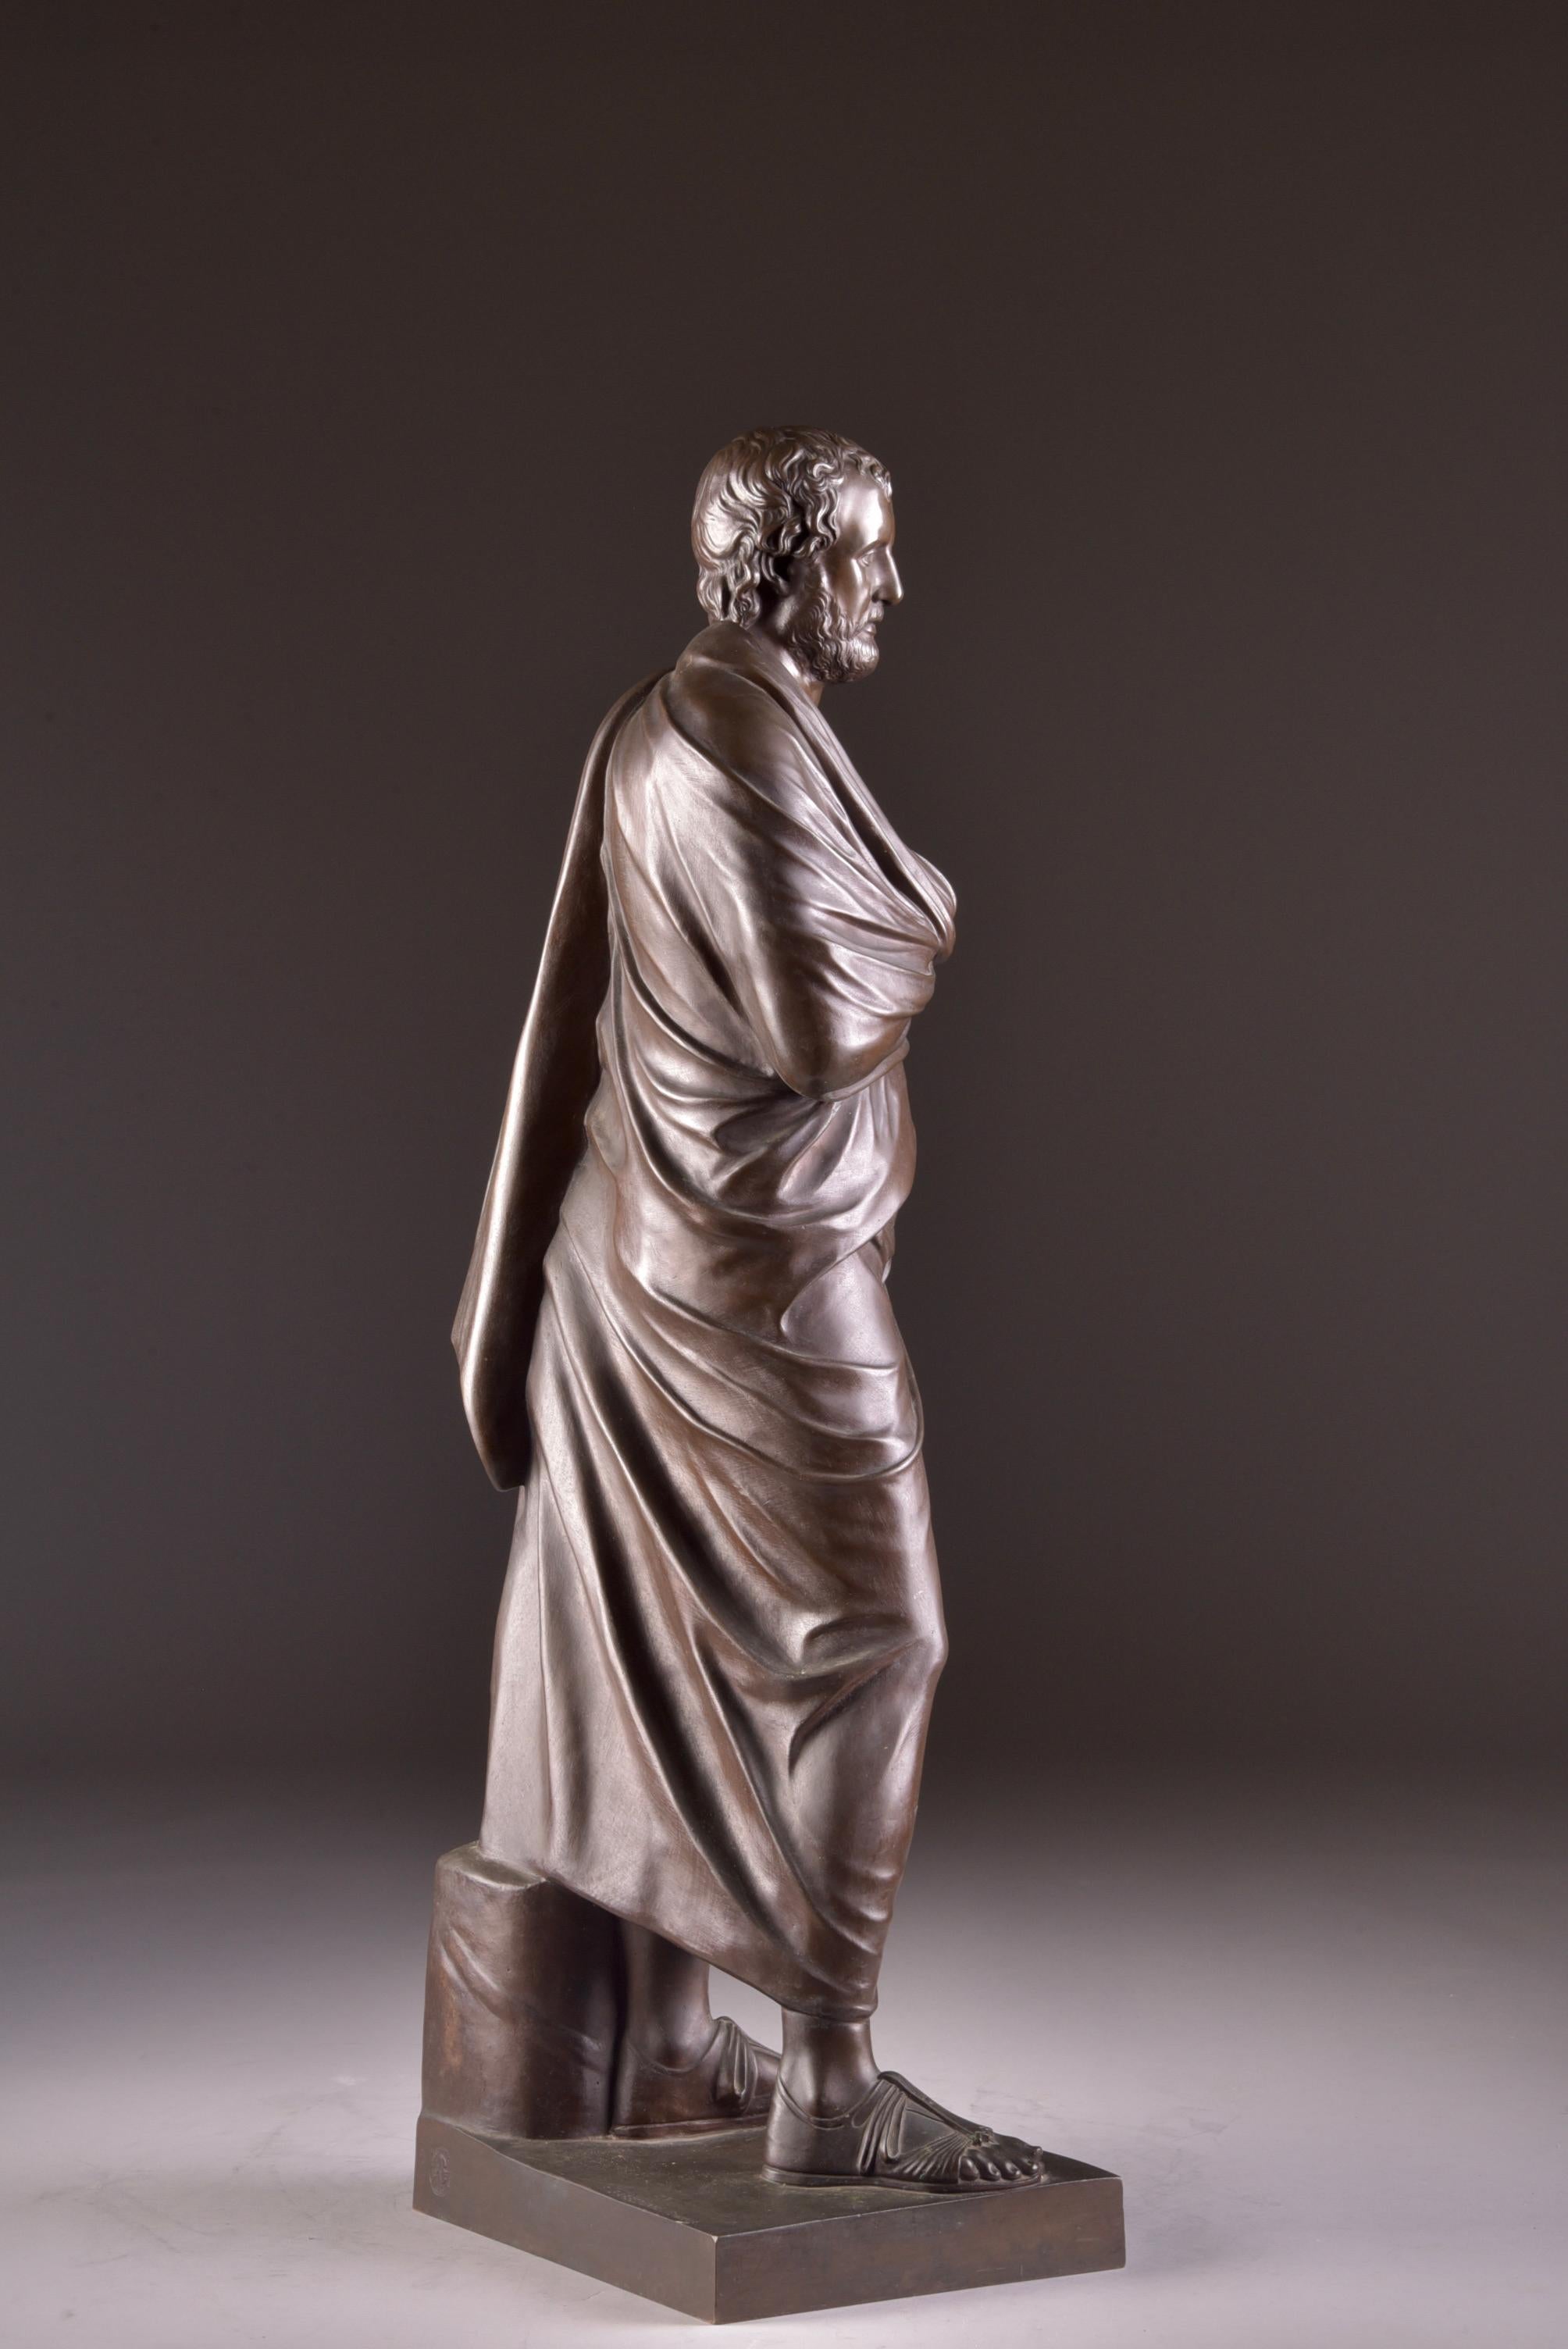 19th Century F. Barbedienne Fondeur, A. Collas Brevete, Beeld, a Large Statue of Sophocles